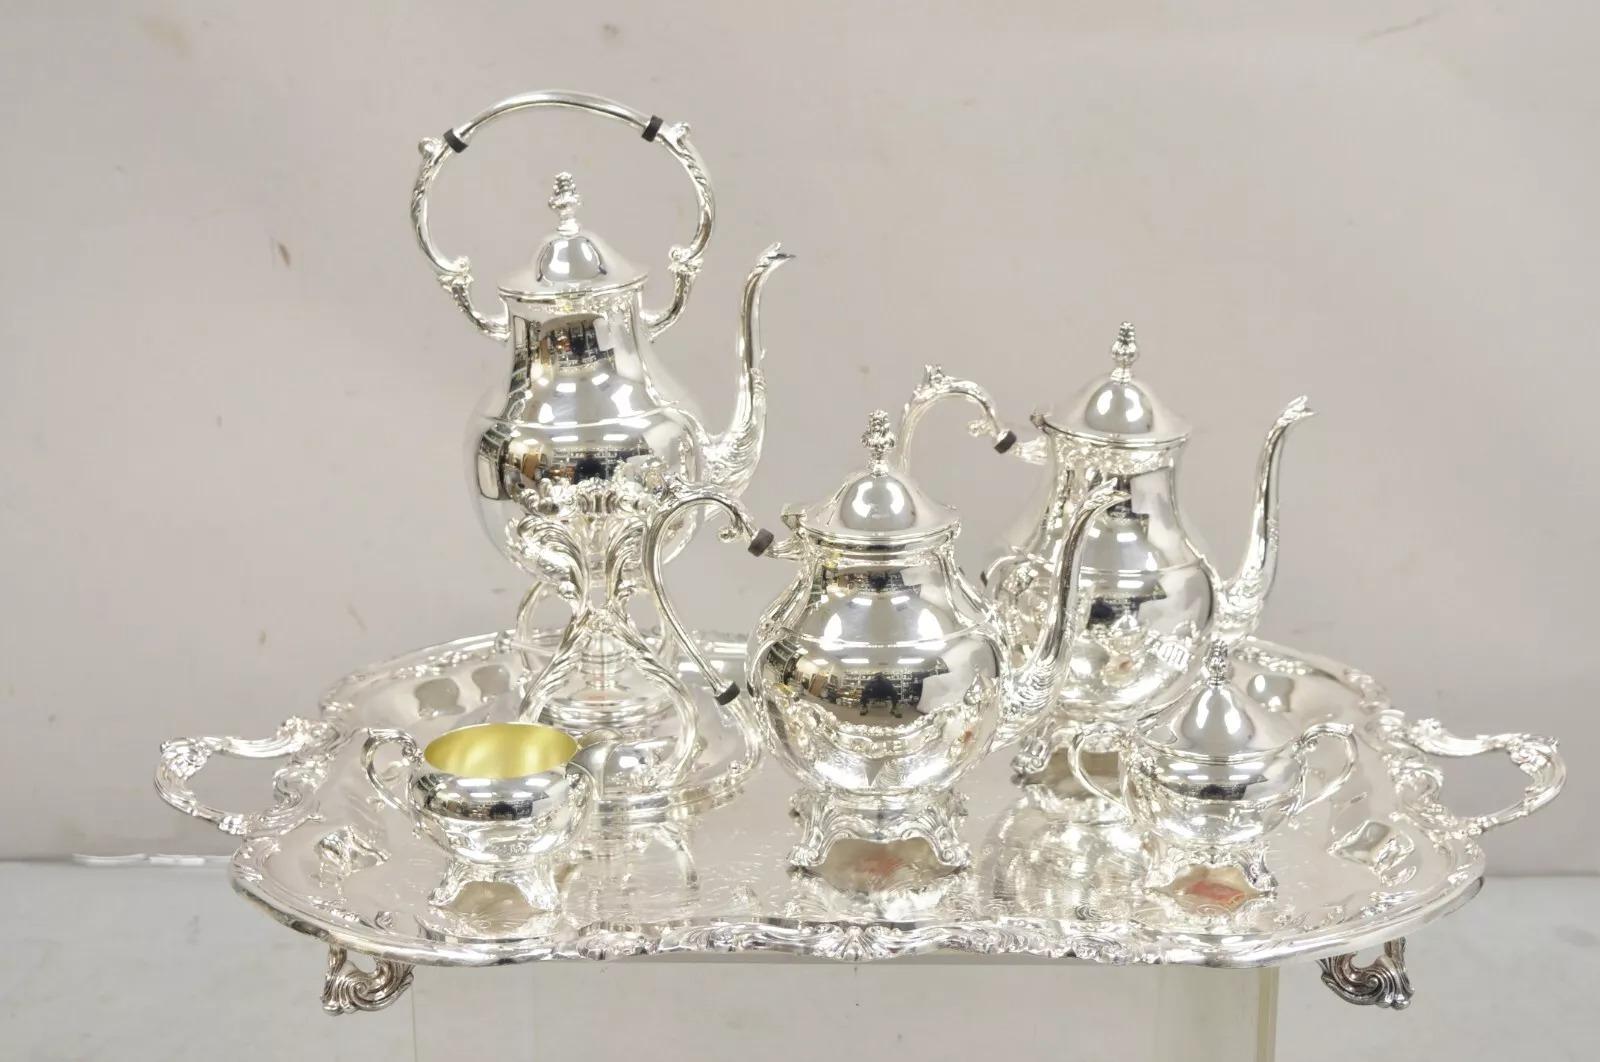 Vintage FB Rogers Victorian Style Silver Plated Tea Set with Tilting Pot - 6 Pc Set. Circa Mid to Late 20th Century.
Measurements:  
Tray: 2.5